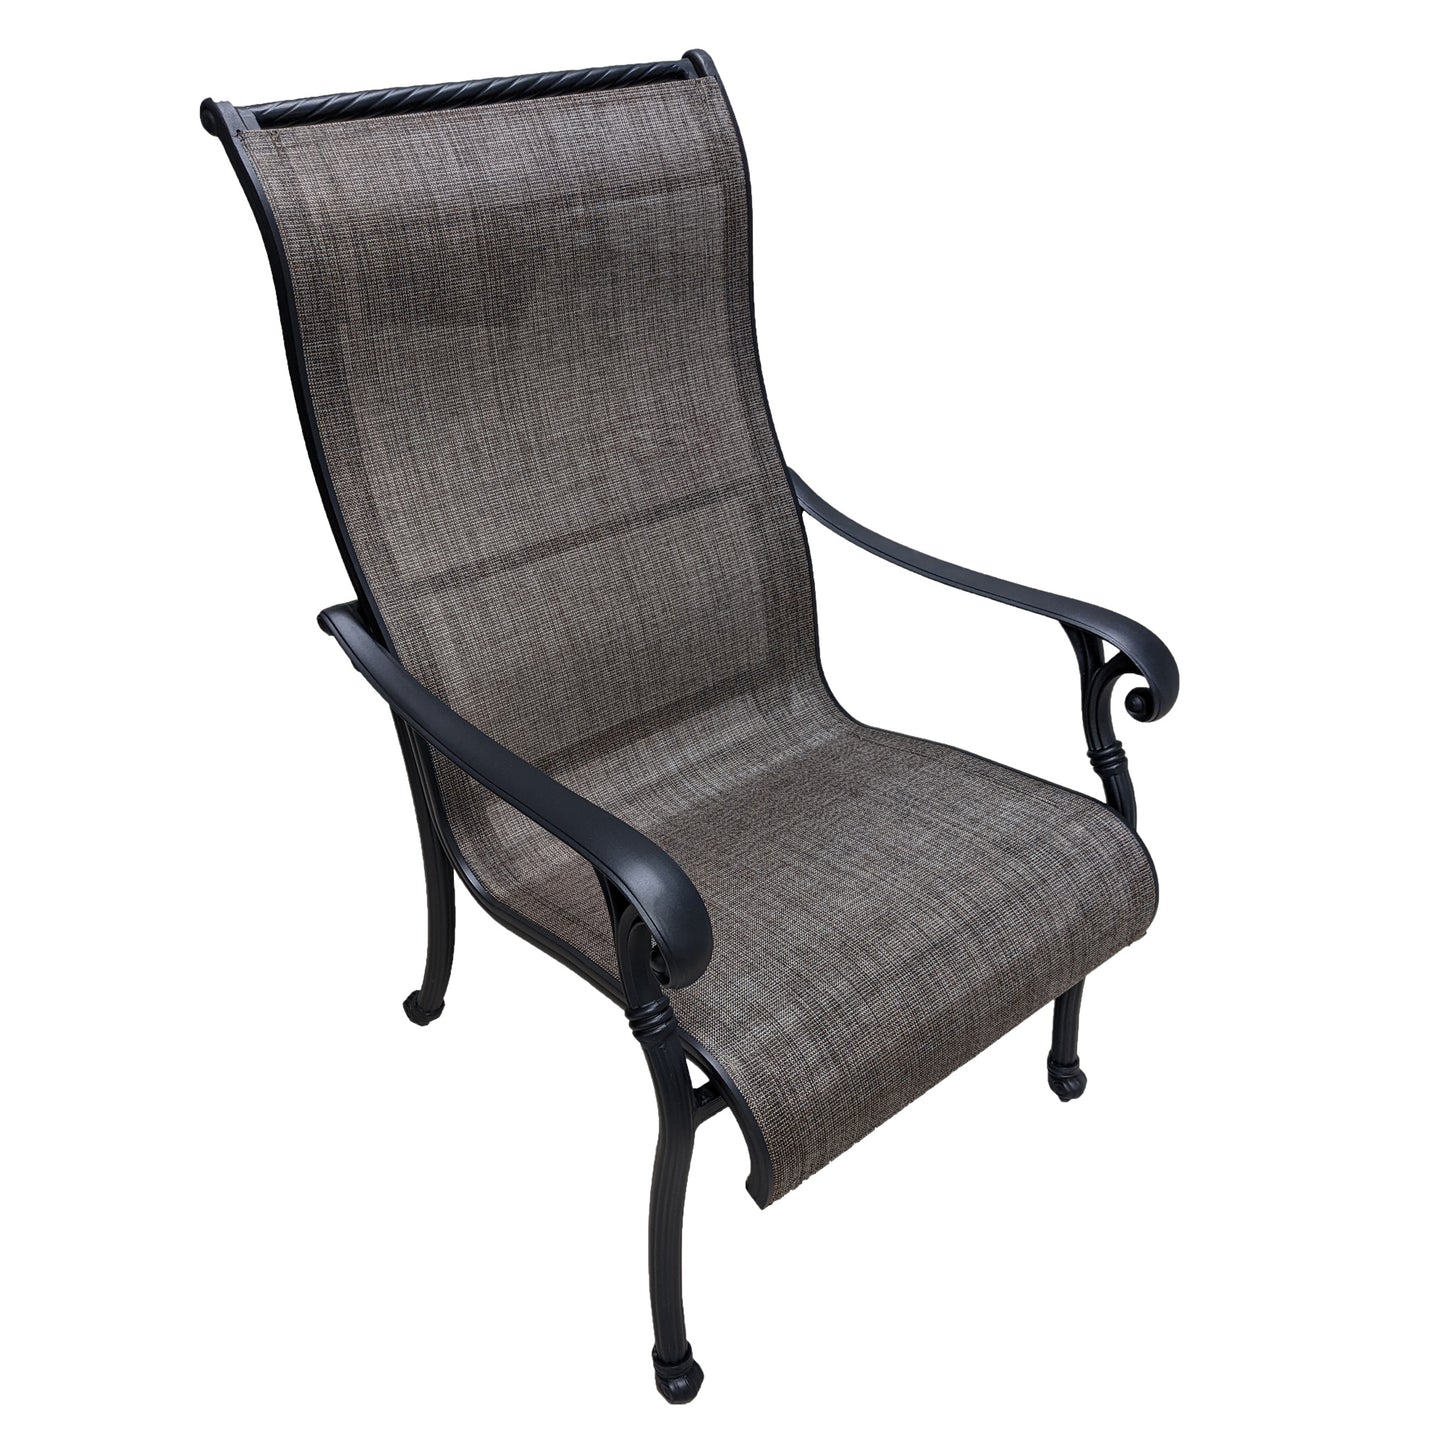 Castle Rock Sling Dining Chair